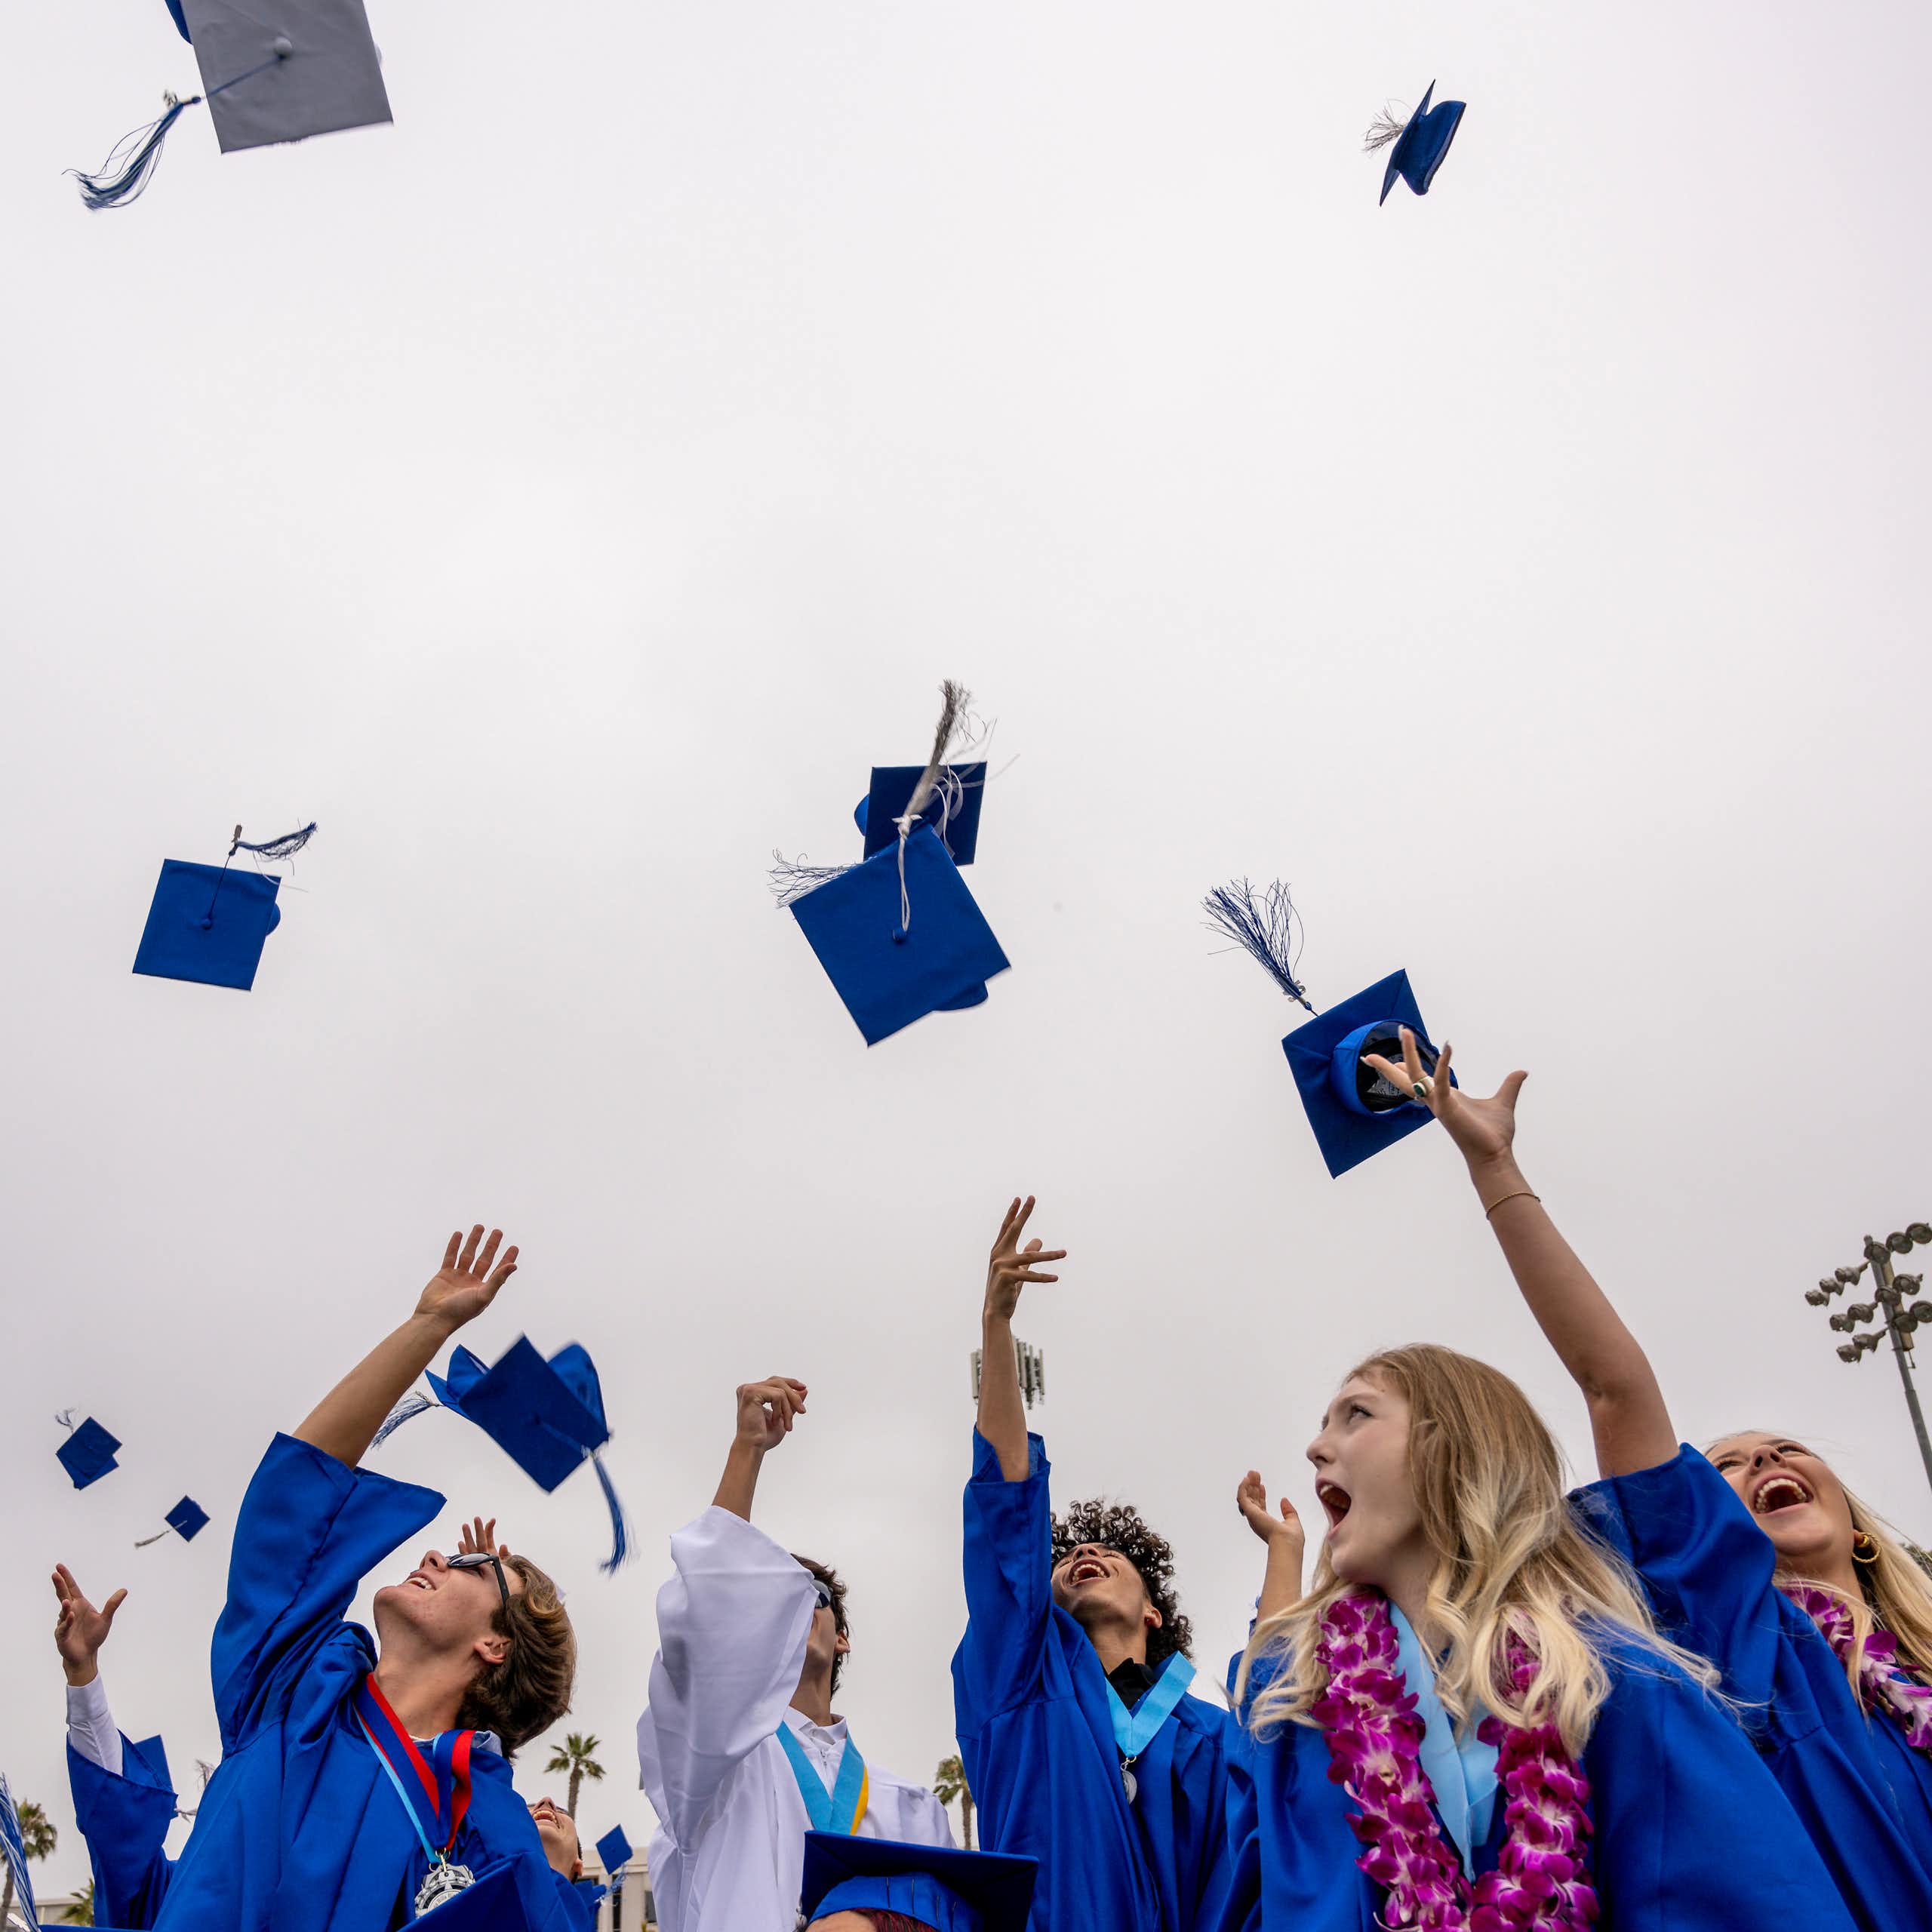 Young men and women wearing blue gowns throw their blue caps in the air in celebration.